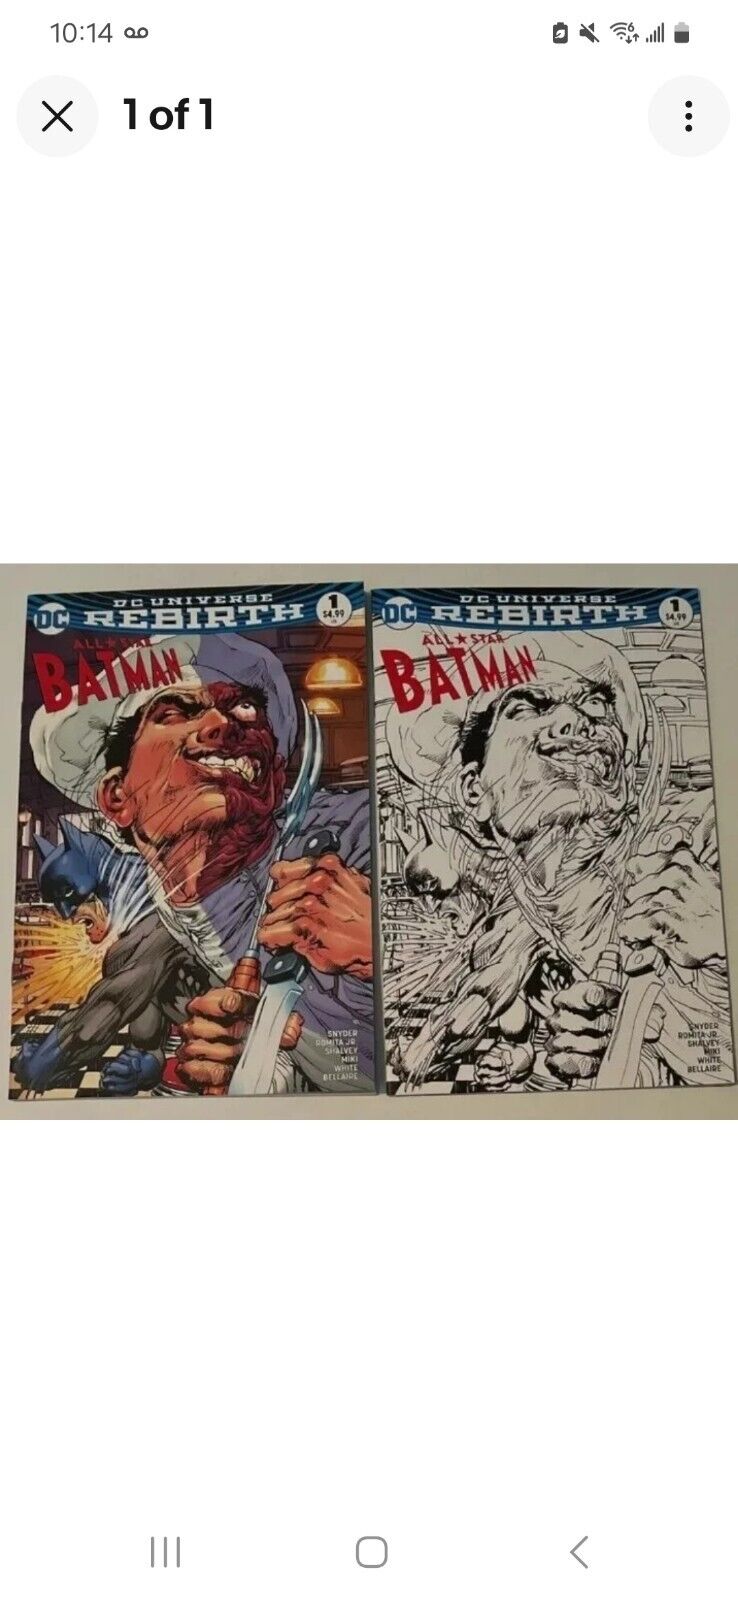 All-Star Batman  #1 DC Regular and Variant by Neal Adams Lot of 2 NM 2016 